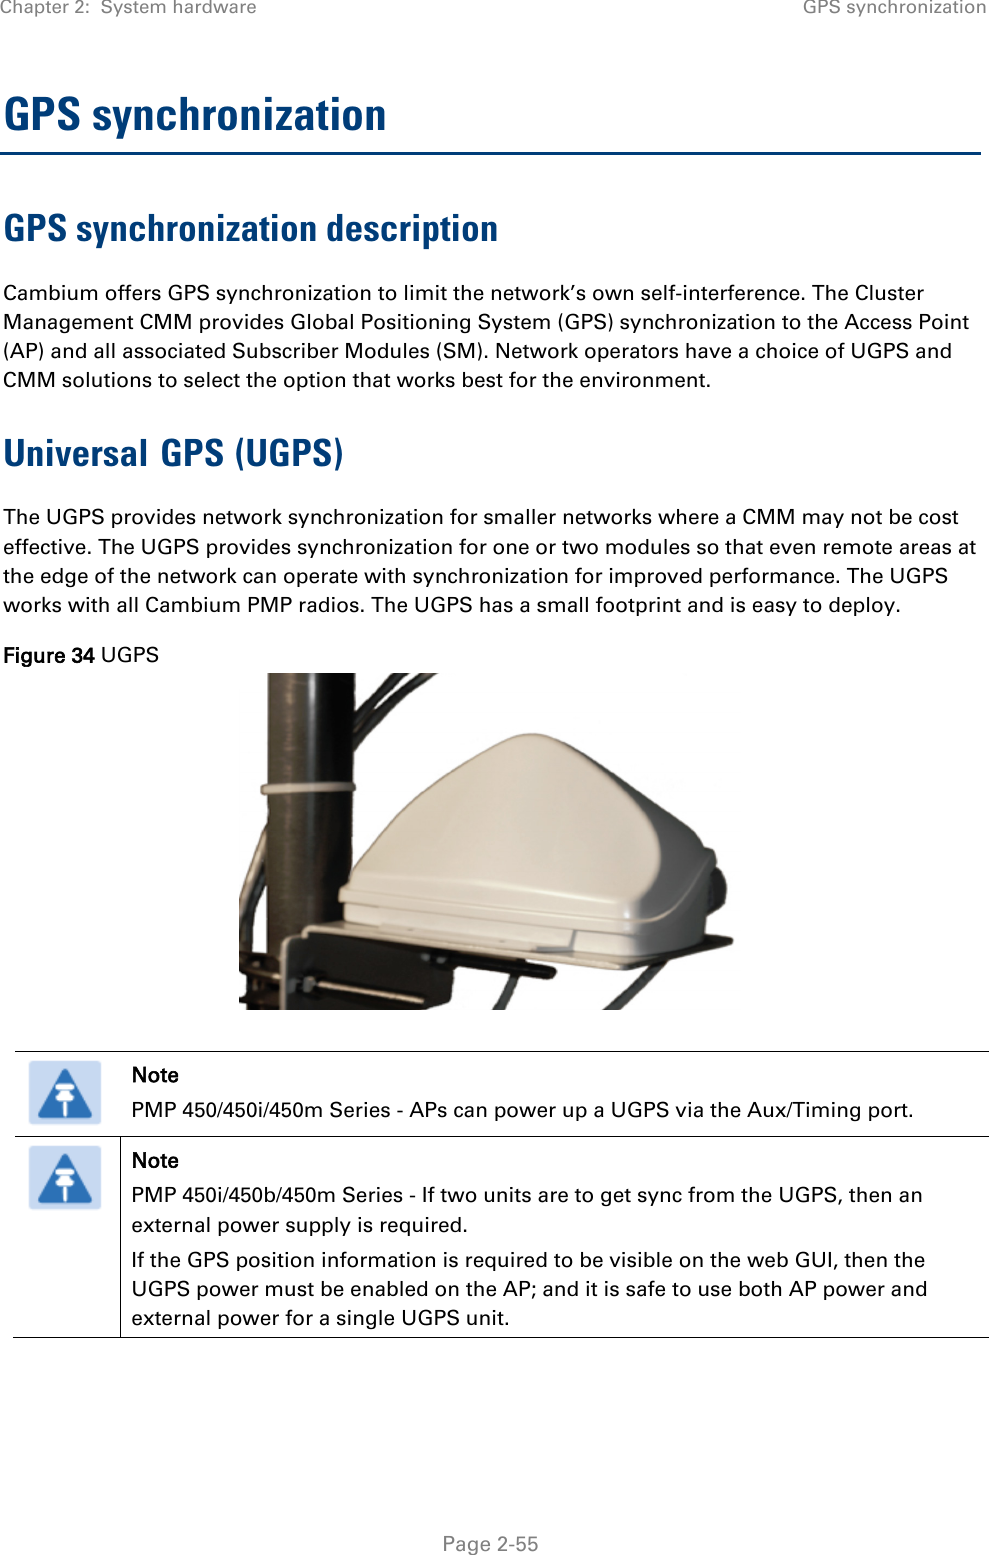 Chapter 2:  System hardware GPS synchronization   Page 2-55 GPS synchronization GPS synchronization description Cambium offers GPS synchronization to limit the network’s own self-interference. The Cluster Management CMM provides Global Positioning System (GPS) synchronization to the Access Point (AP) and all associated Subscriber Modules (SM). Network operators have a choice of UGPS and CMM solutions to select the option that works best for the environment. Universal GPS (UGPS) The UGPS provides network synchronization for smaller networks where a CMM may not be cost effective. The UGPS provides synchronization for one or two modules so that even remote areas at the edge of the network can operate with synchronization for improved performance. The UGPS works with all Cambium PMP radios. The UGPS has a small footprint and is easy to deploy. Figure 34 UGPS    Note PMP 450/450i/450m Series - APs can power up a UGPS via the Aux/Timing port.  Note PMP 450i/450b/450m Series - If two units are to get sync from the UGPS, then an external power supply is required.  If the GPS position information is required to be visible on the web GUI, then the UGPS power must be enabled on the AP; and it is safe to use both AP power and external power for a single UGPS unit.     